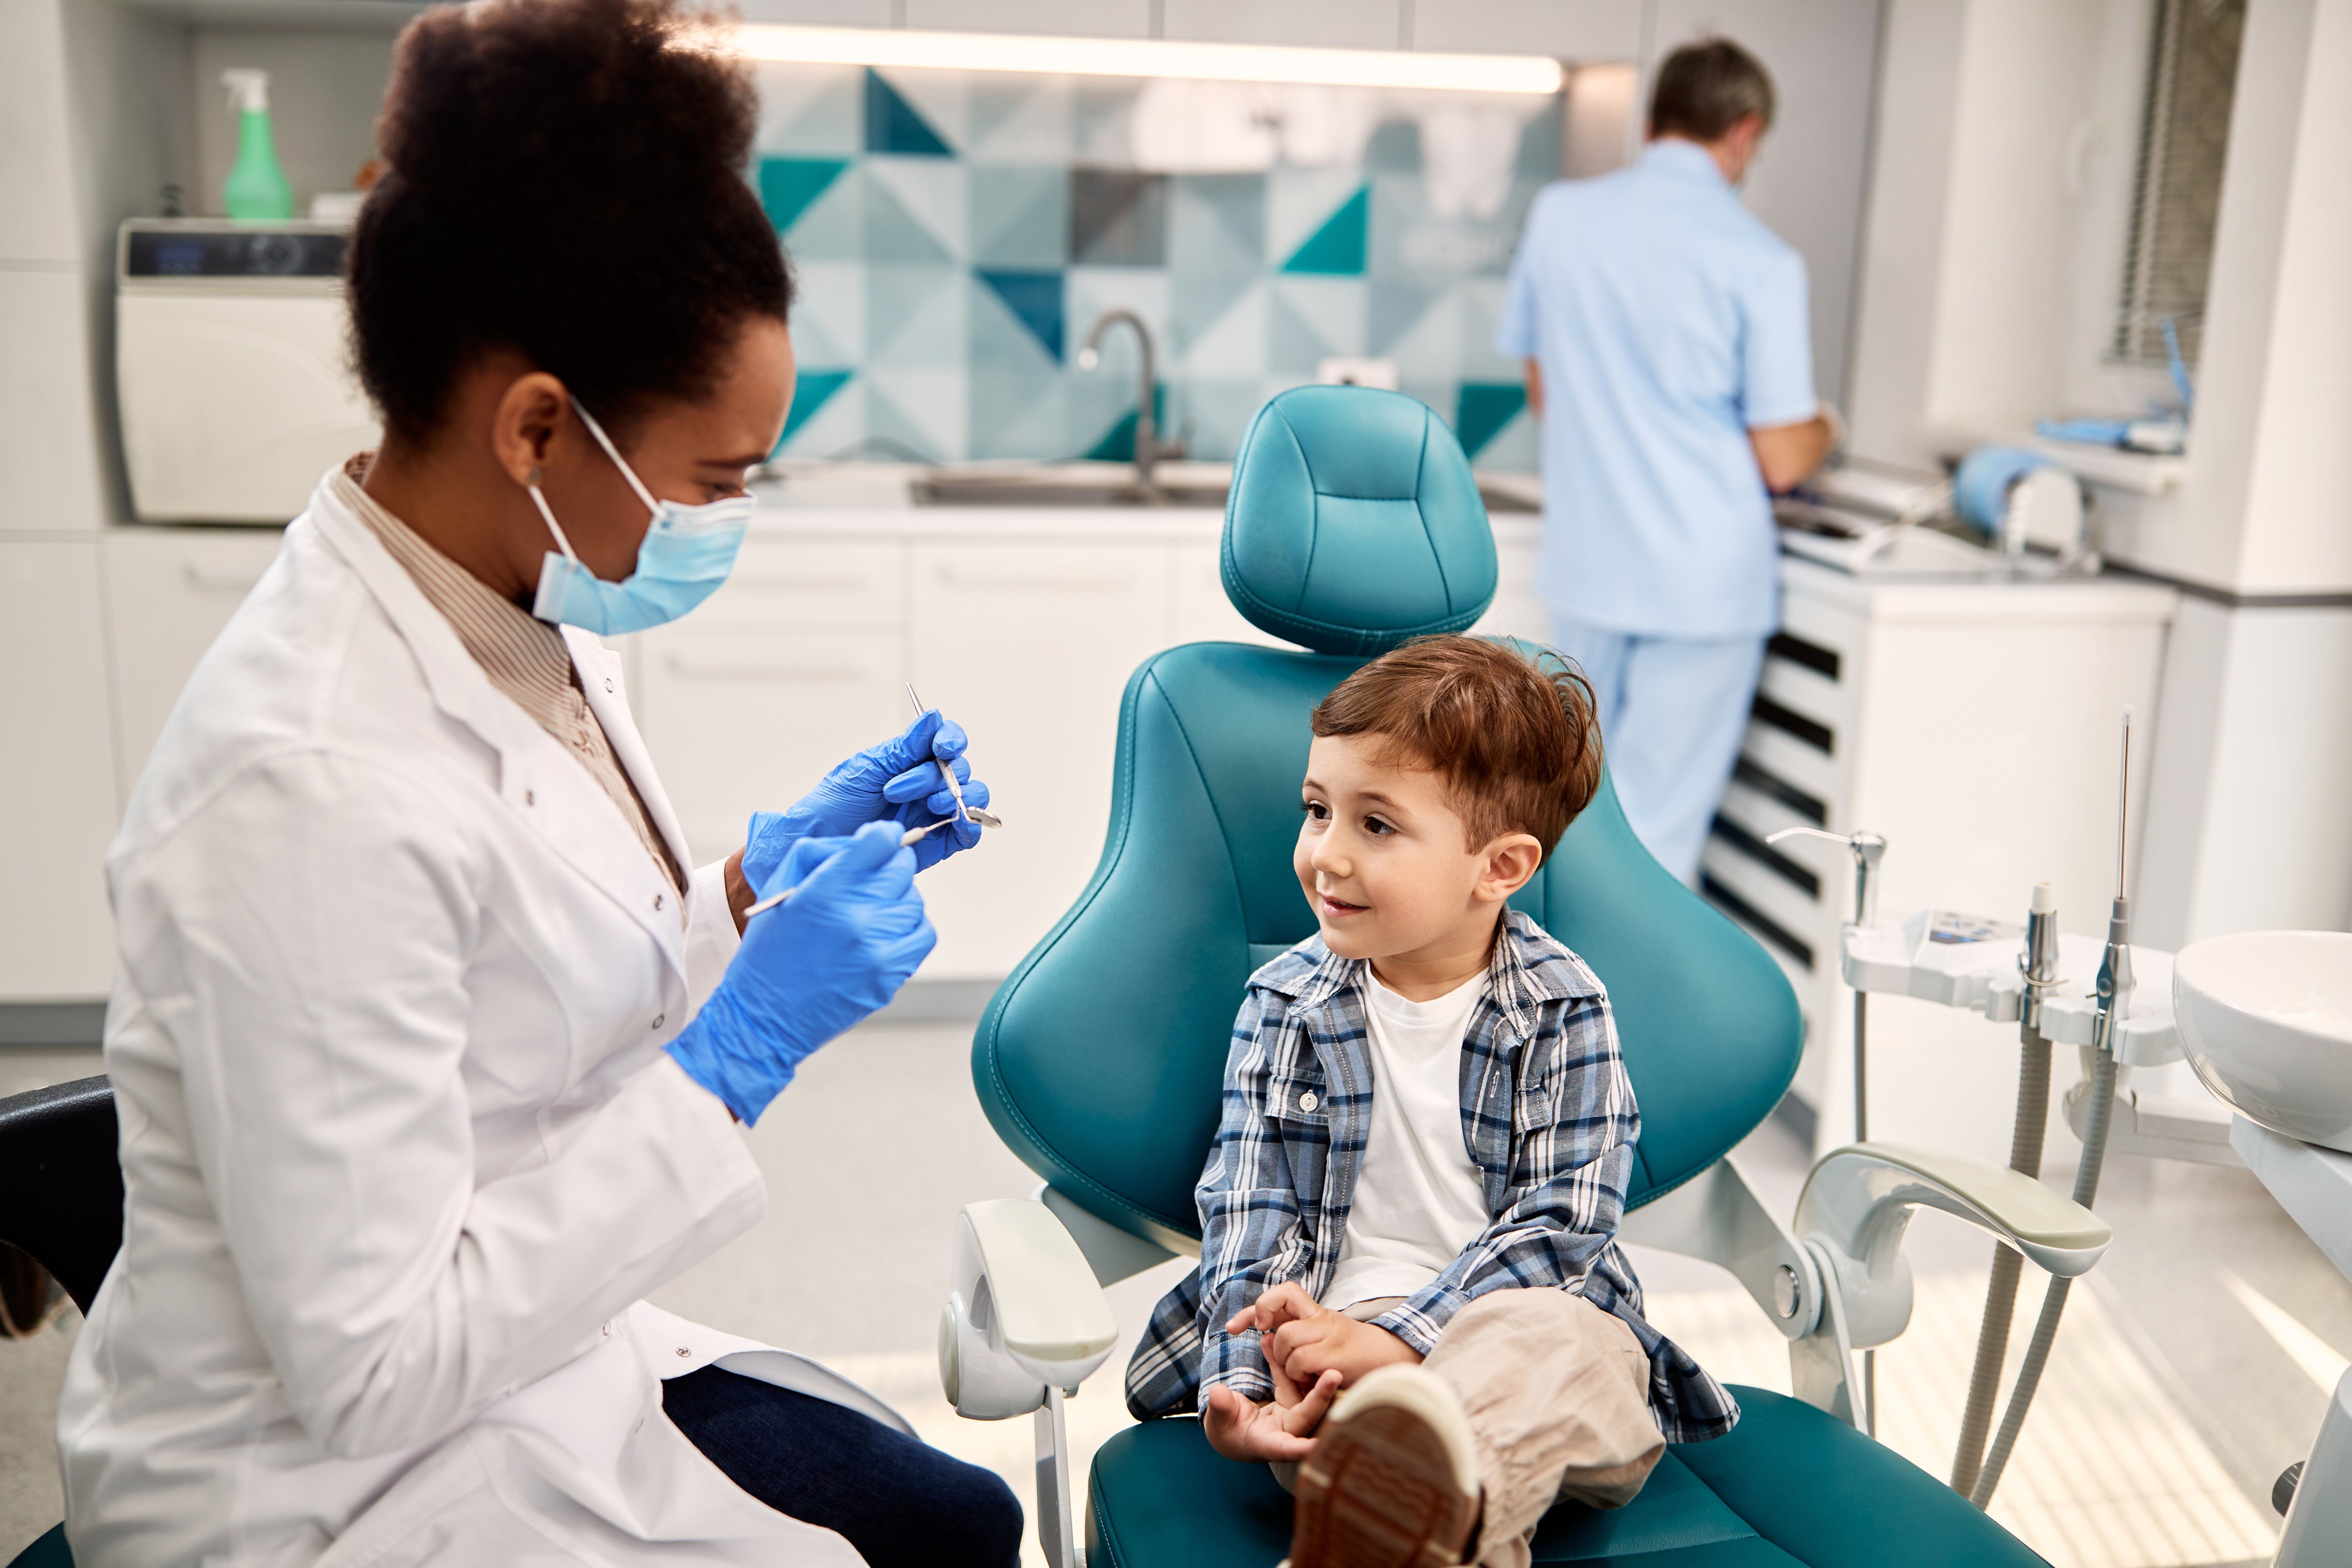 Tips for Getting Your Child Acclimated to the Dentist